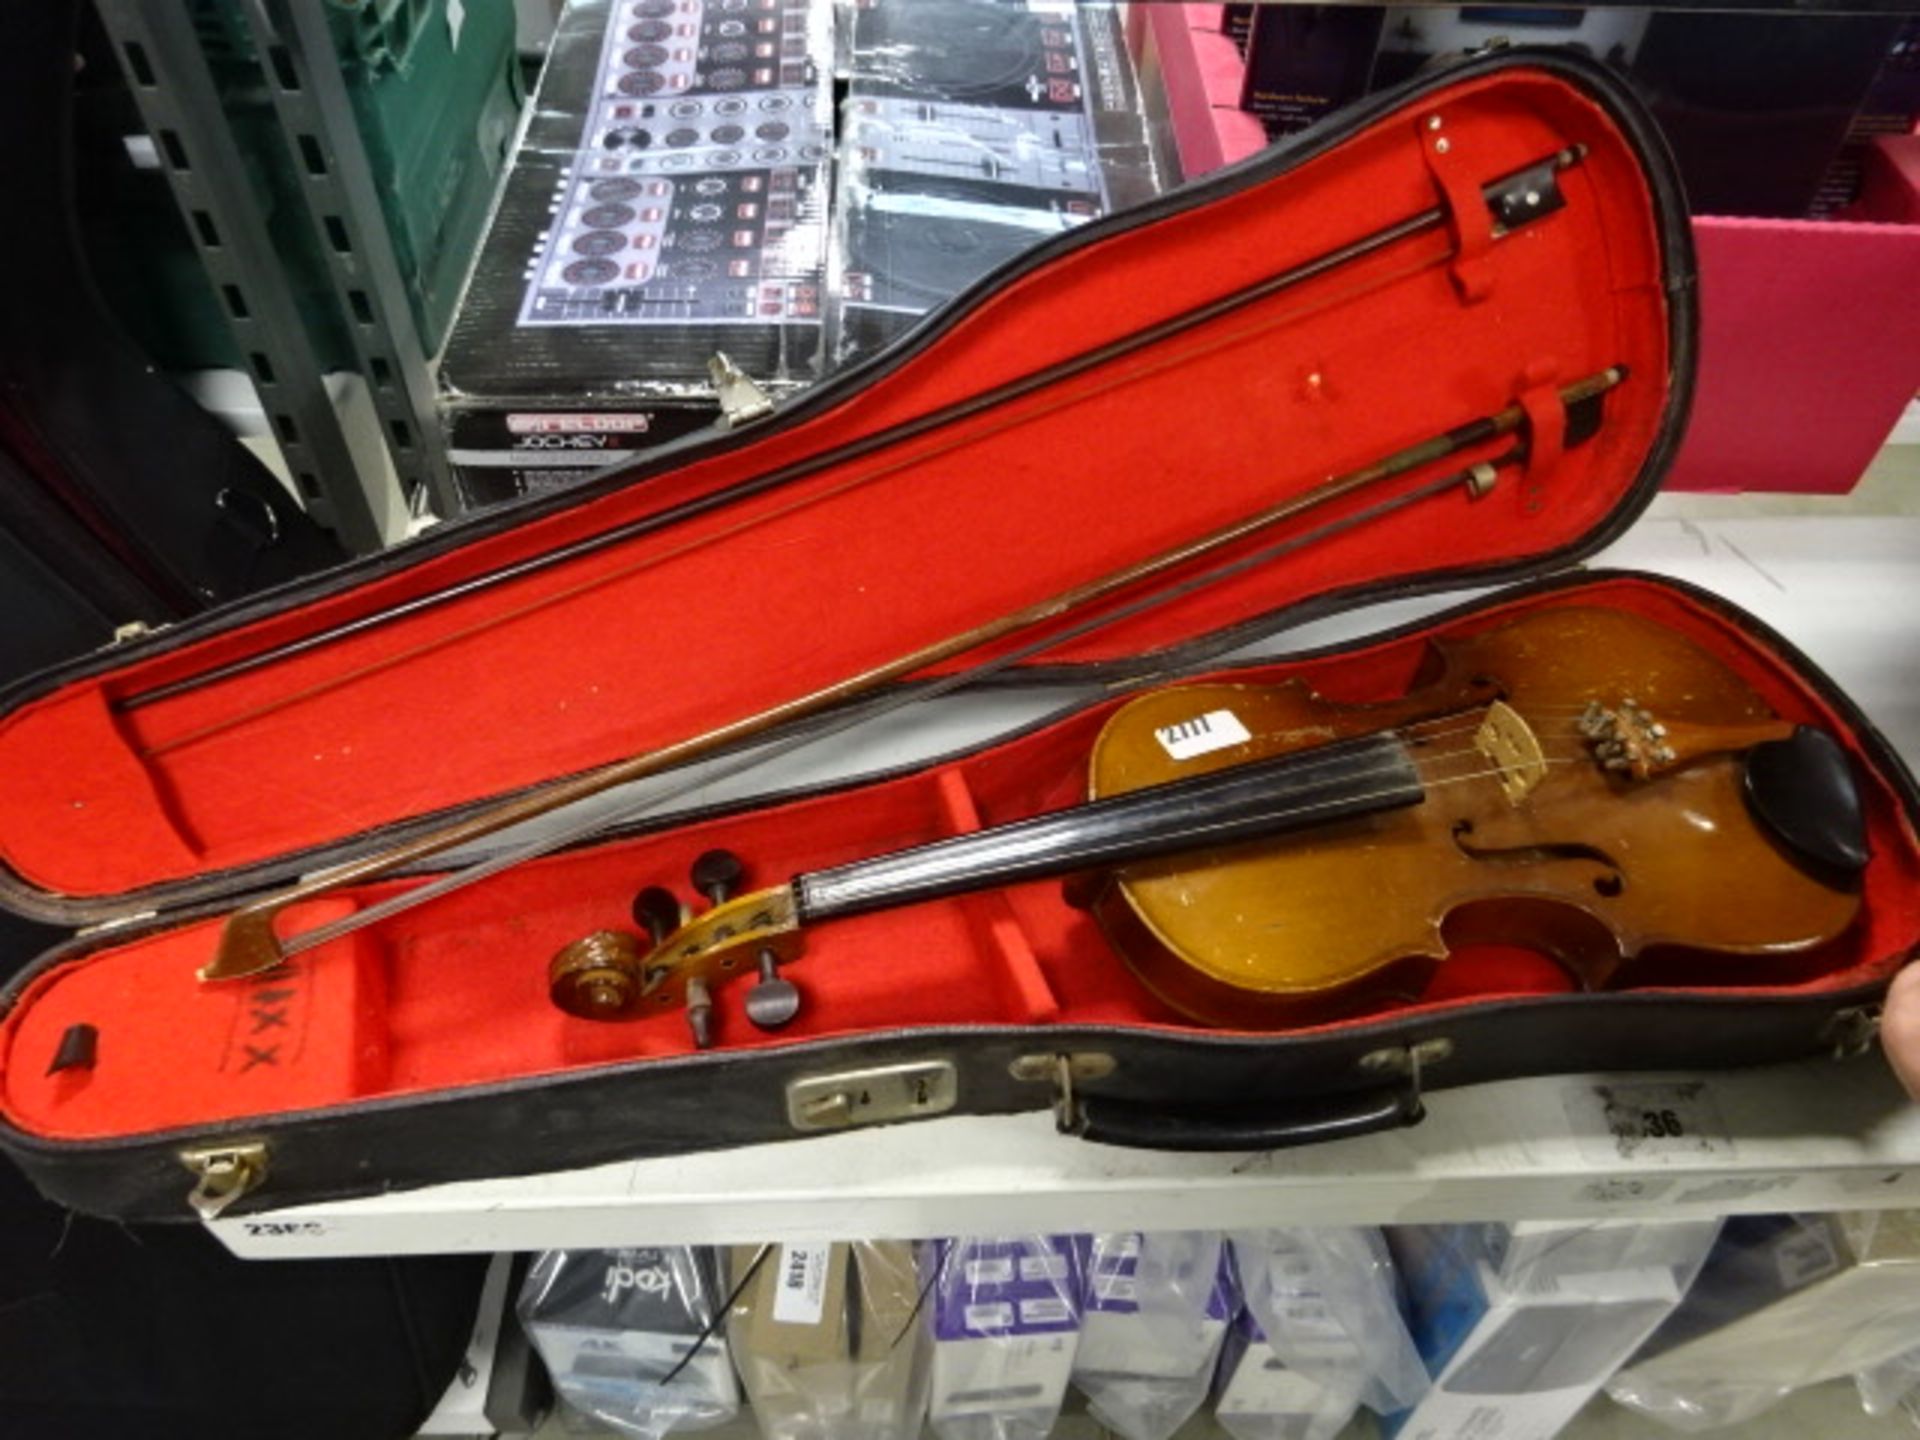 A violin with hard case and bow